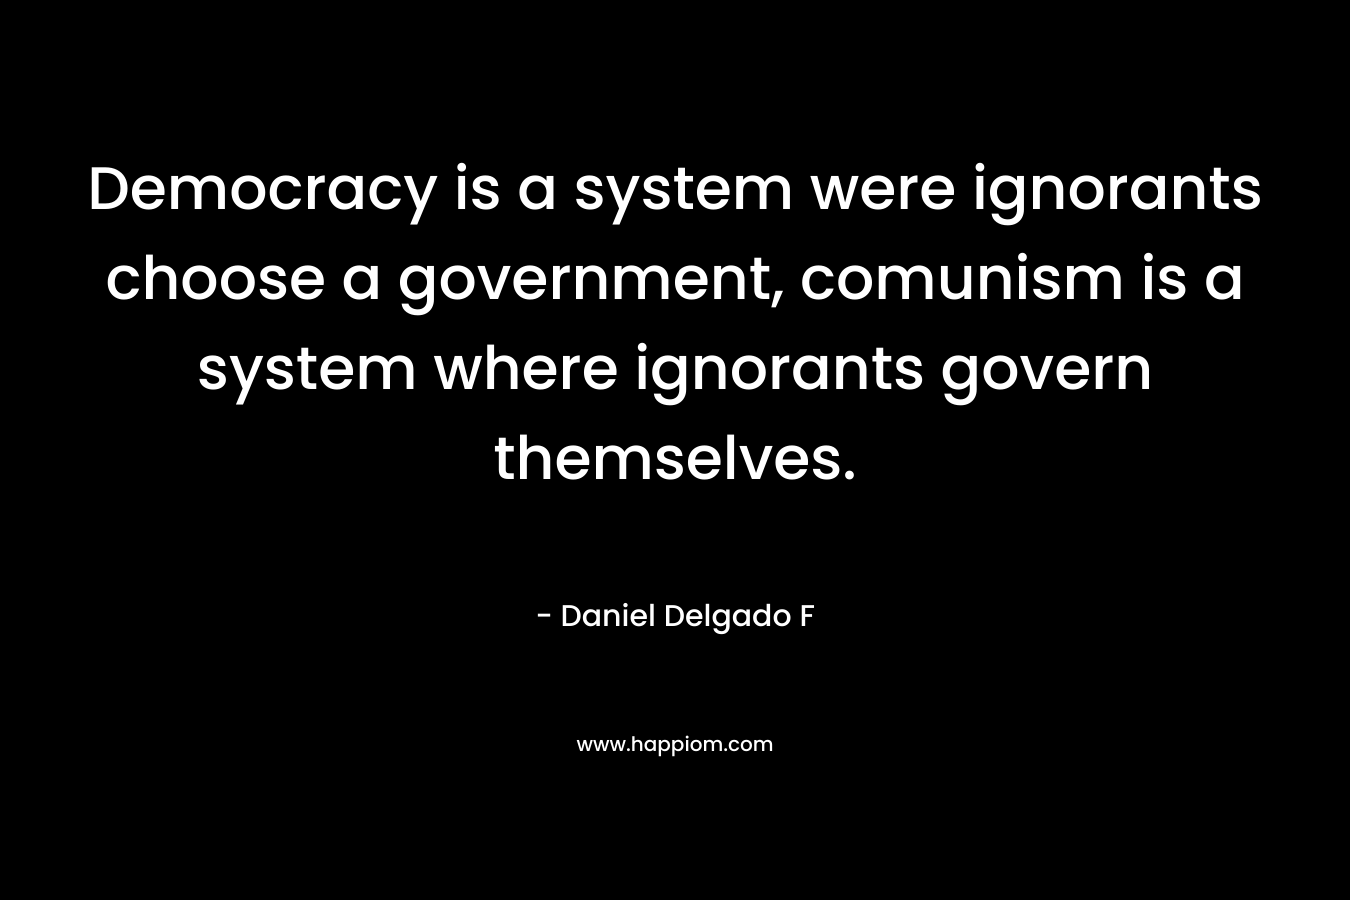 Democracy is a system were ignorants choose a government, comunism is a system where ignorants govern themselves.